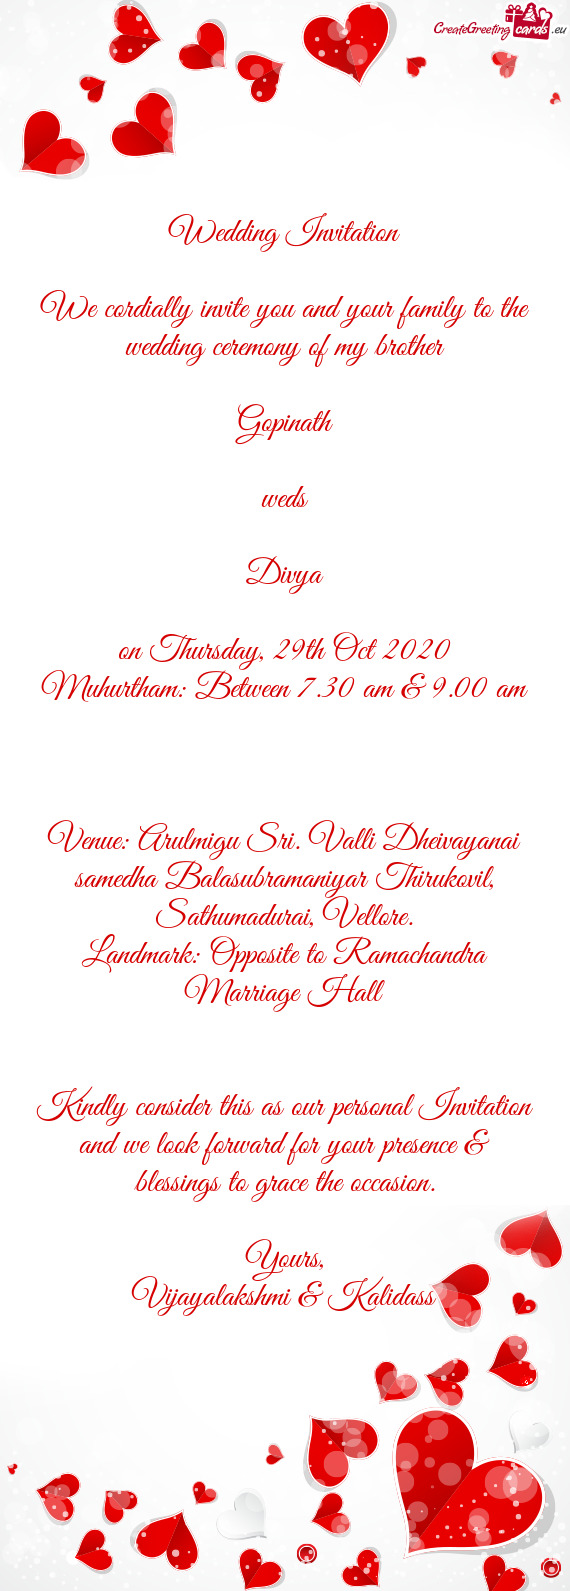 We cordially invite you and your family to the wedding ceremony of my brother